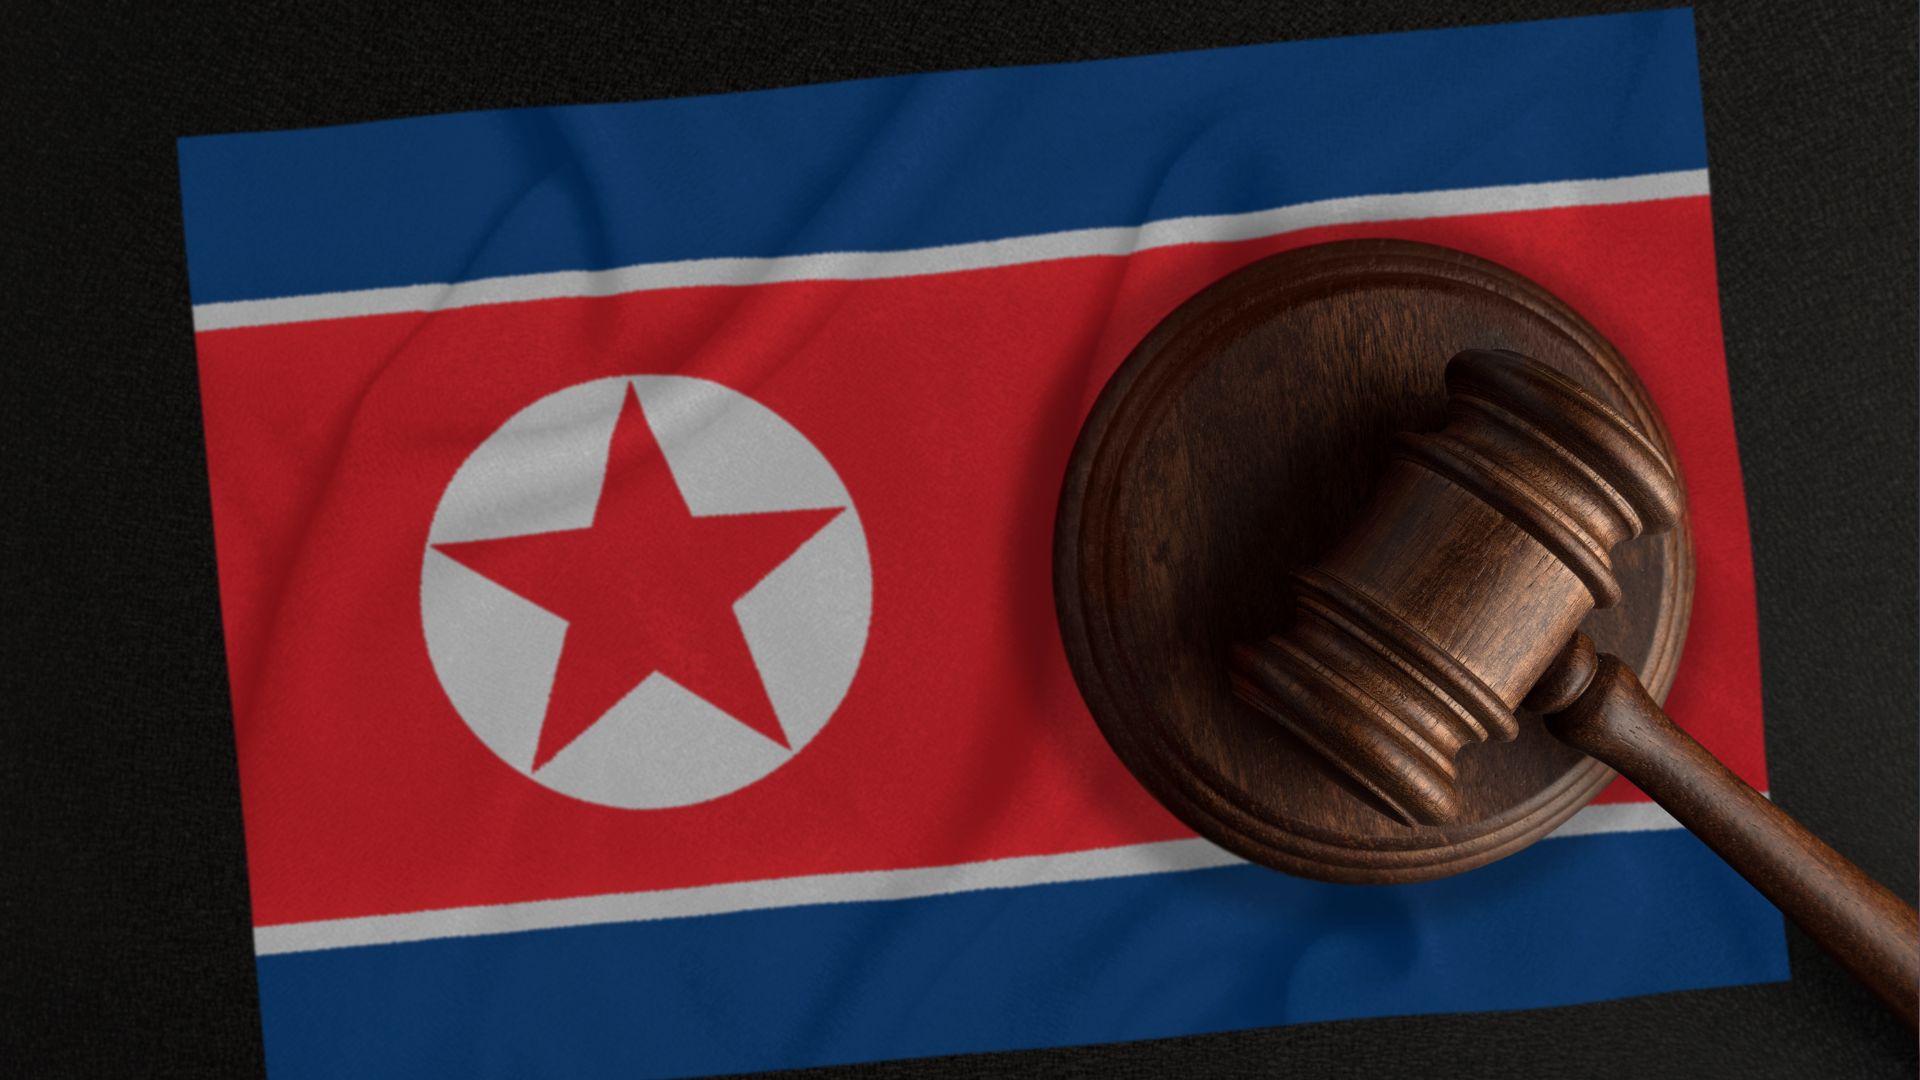 Human Rights in North Korea and Peace on the Korean Peninsula